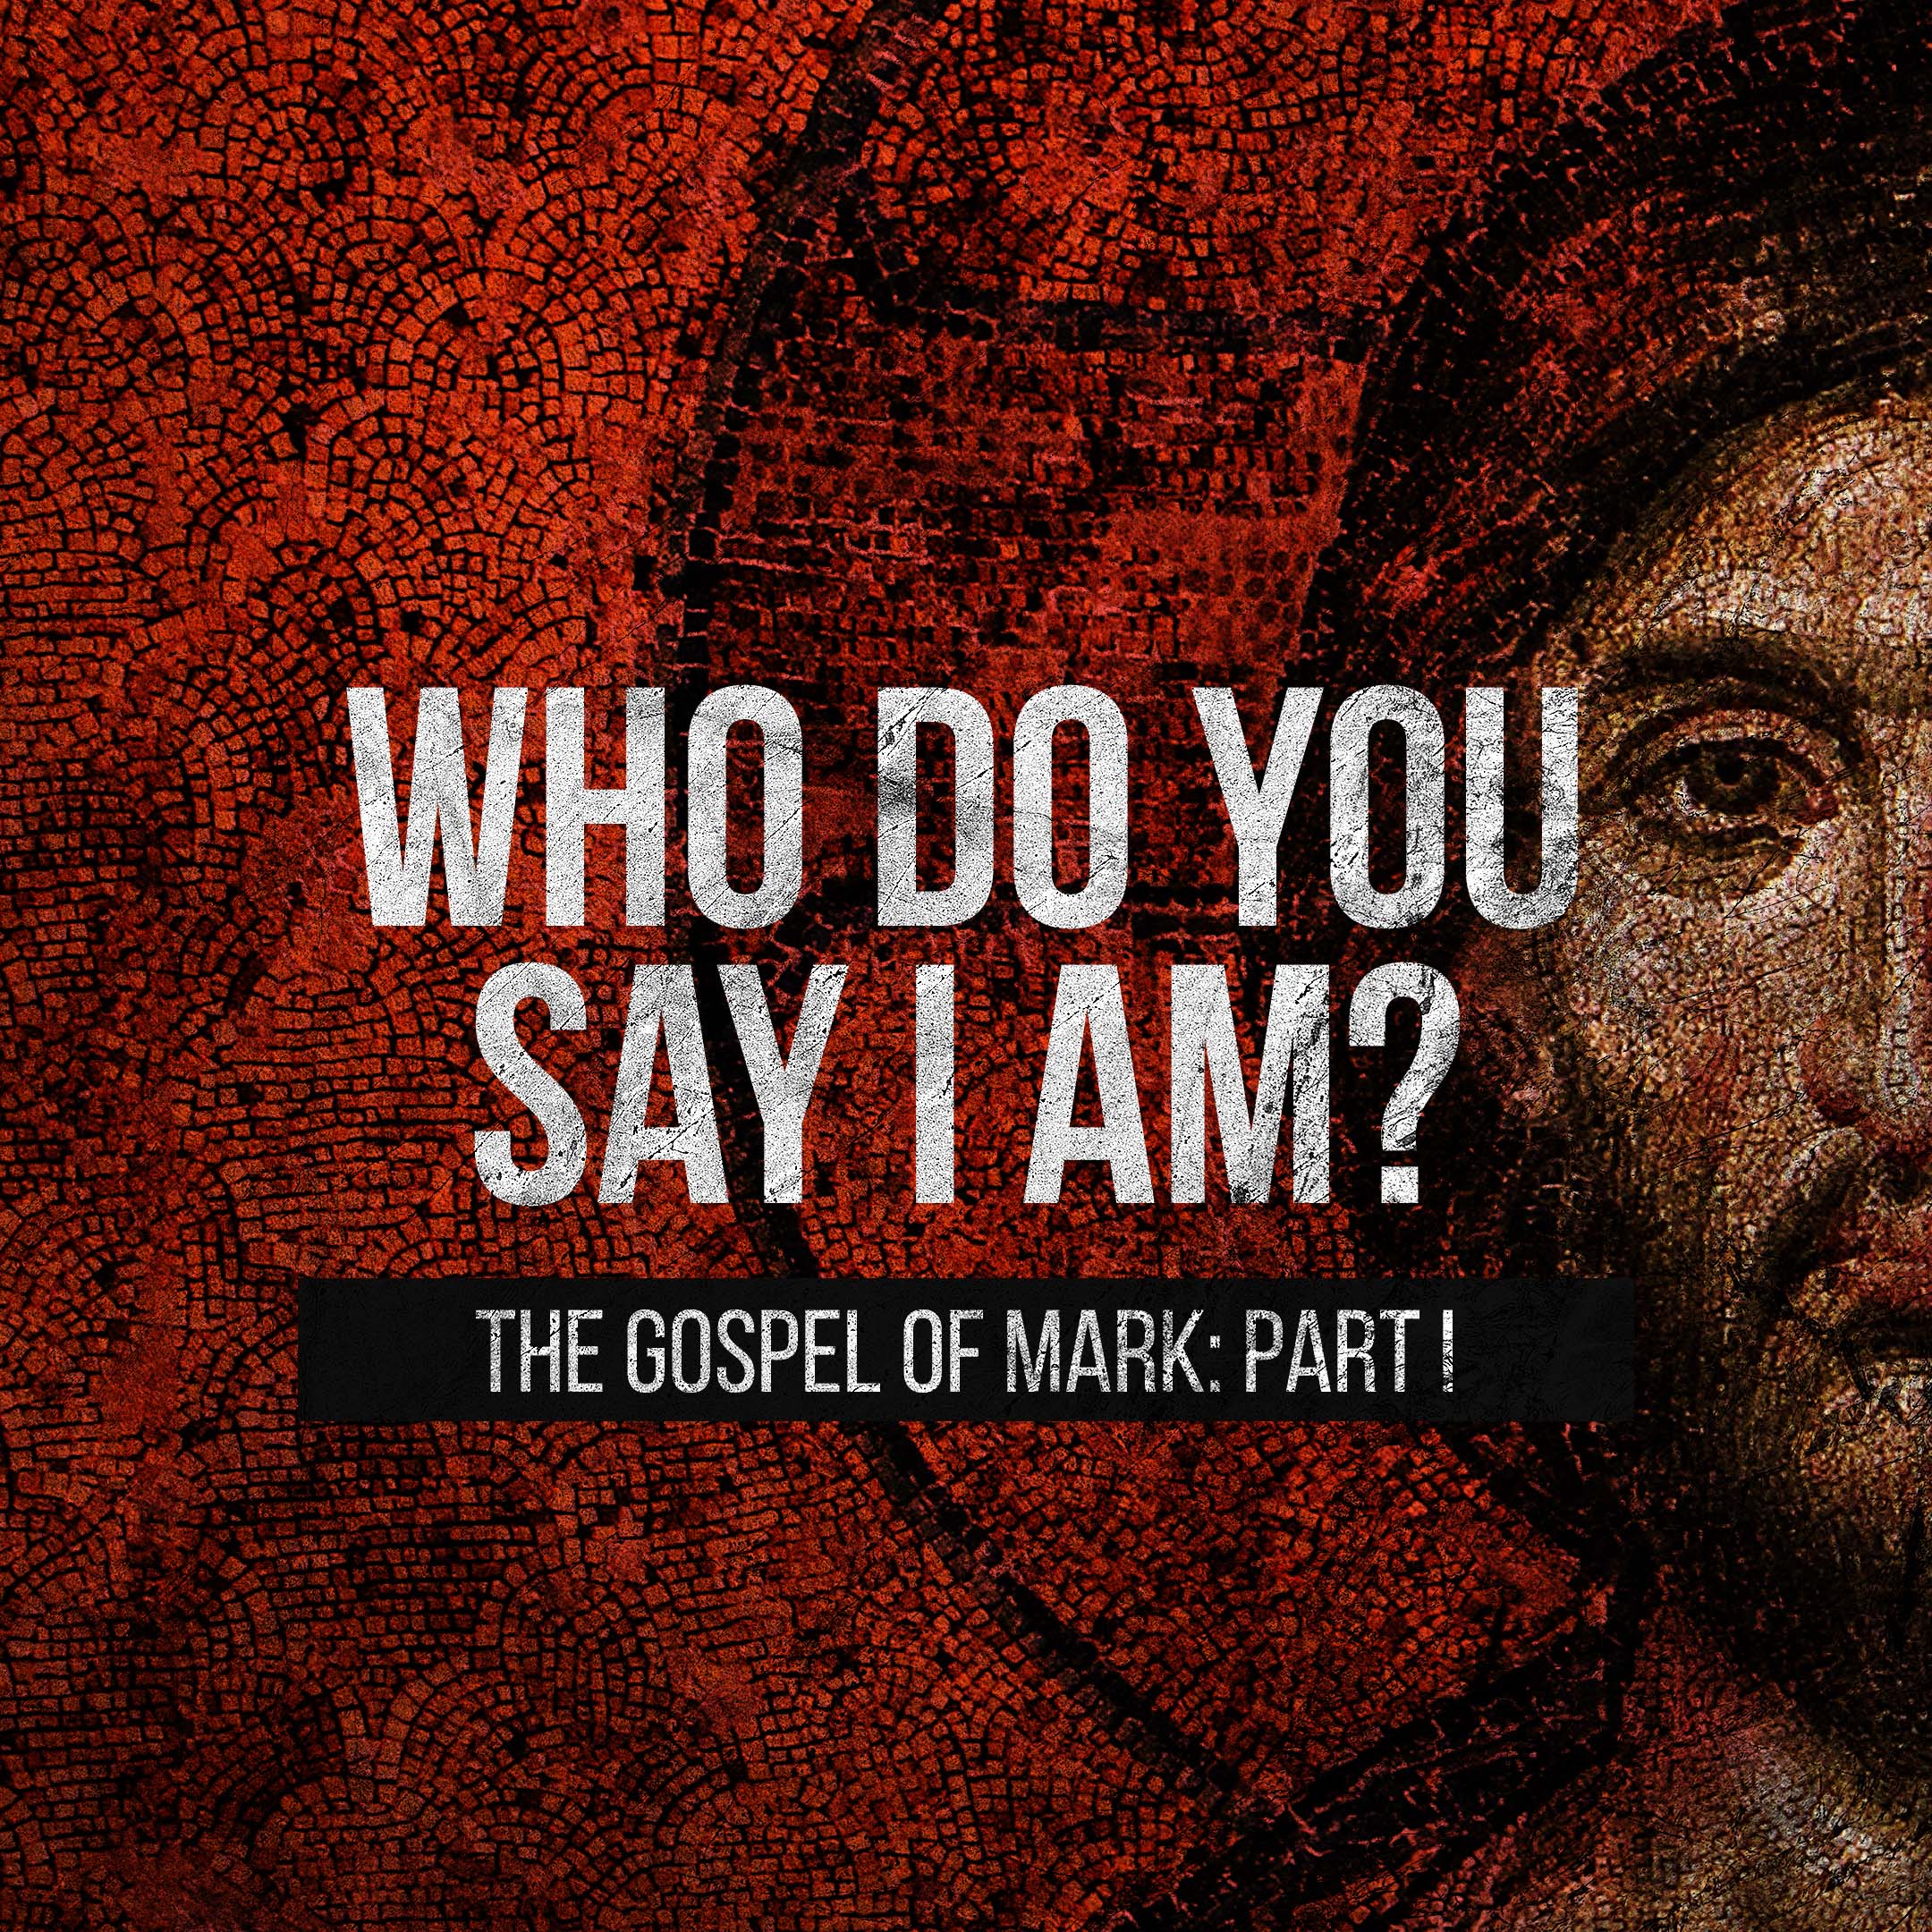 The Book of Mark - Power to Save - Mark 5:1-20